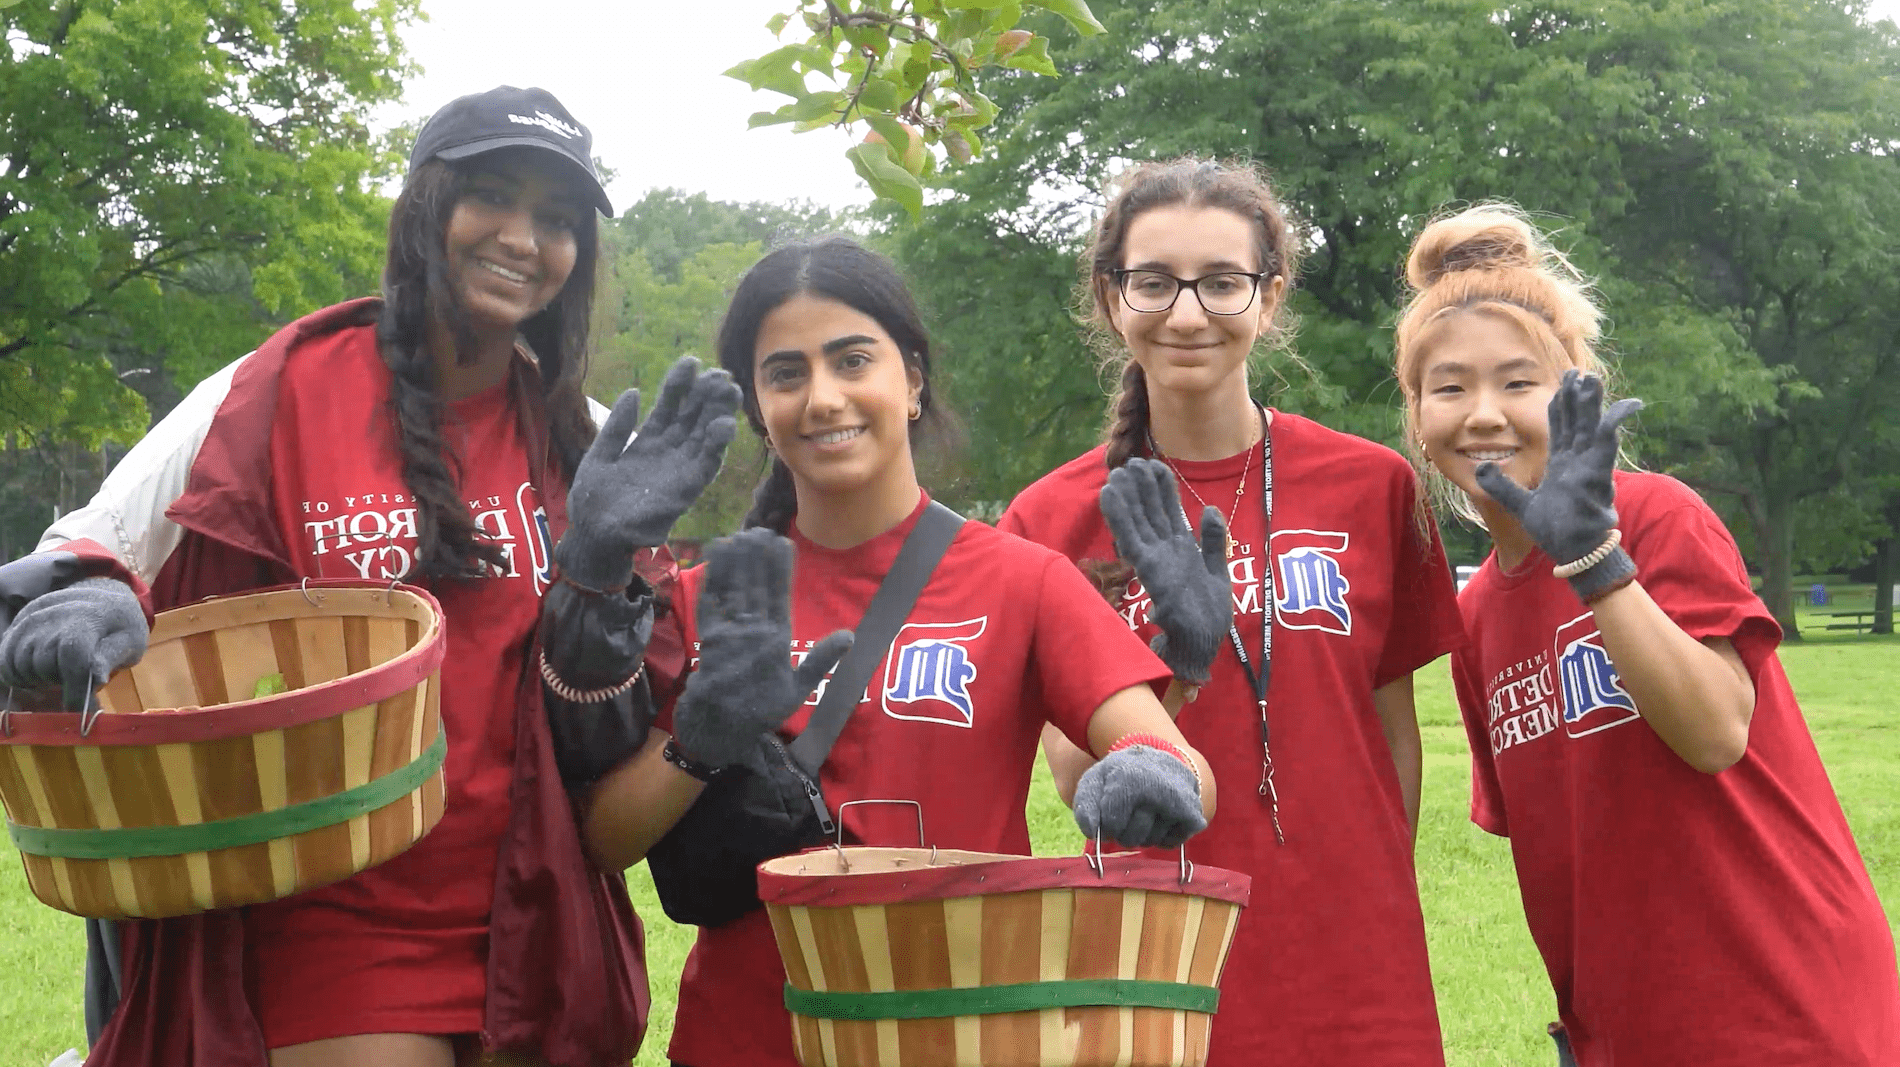 Video of Detroit Mercy students participating in community service projects in neighborhoods and parks near the McNichols Campus.